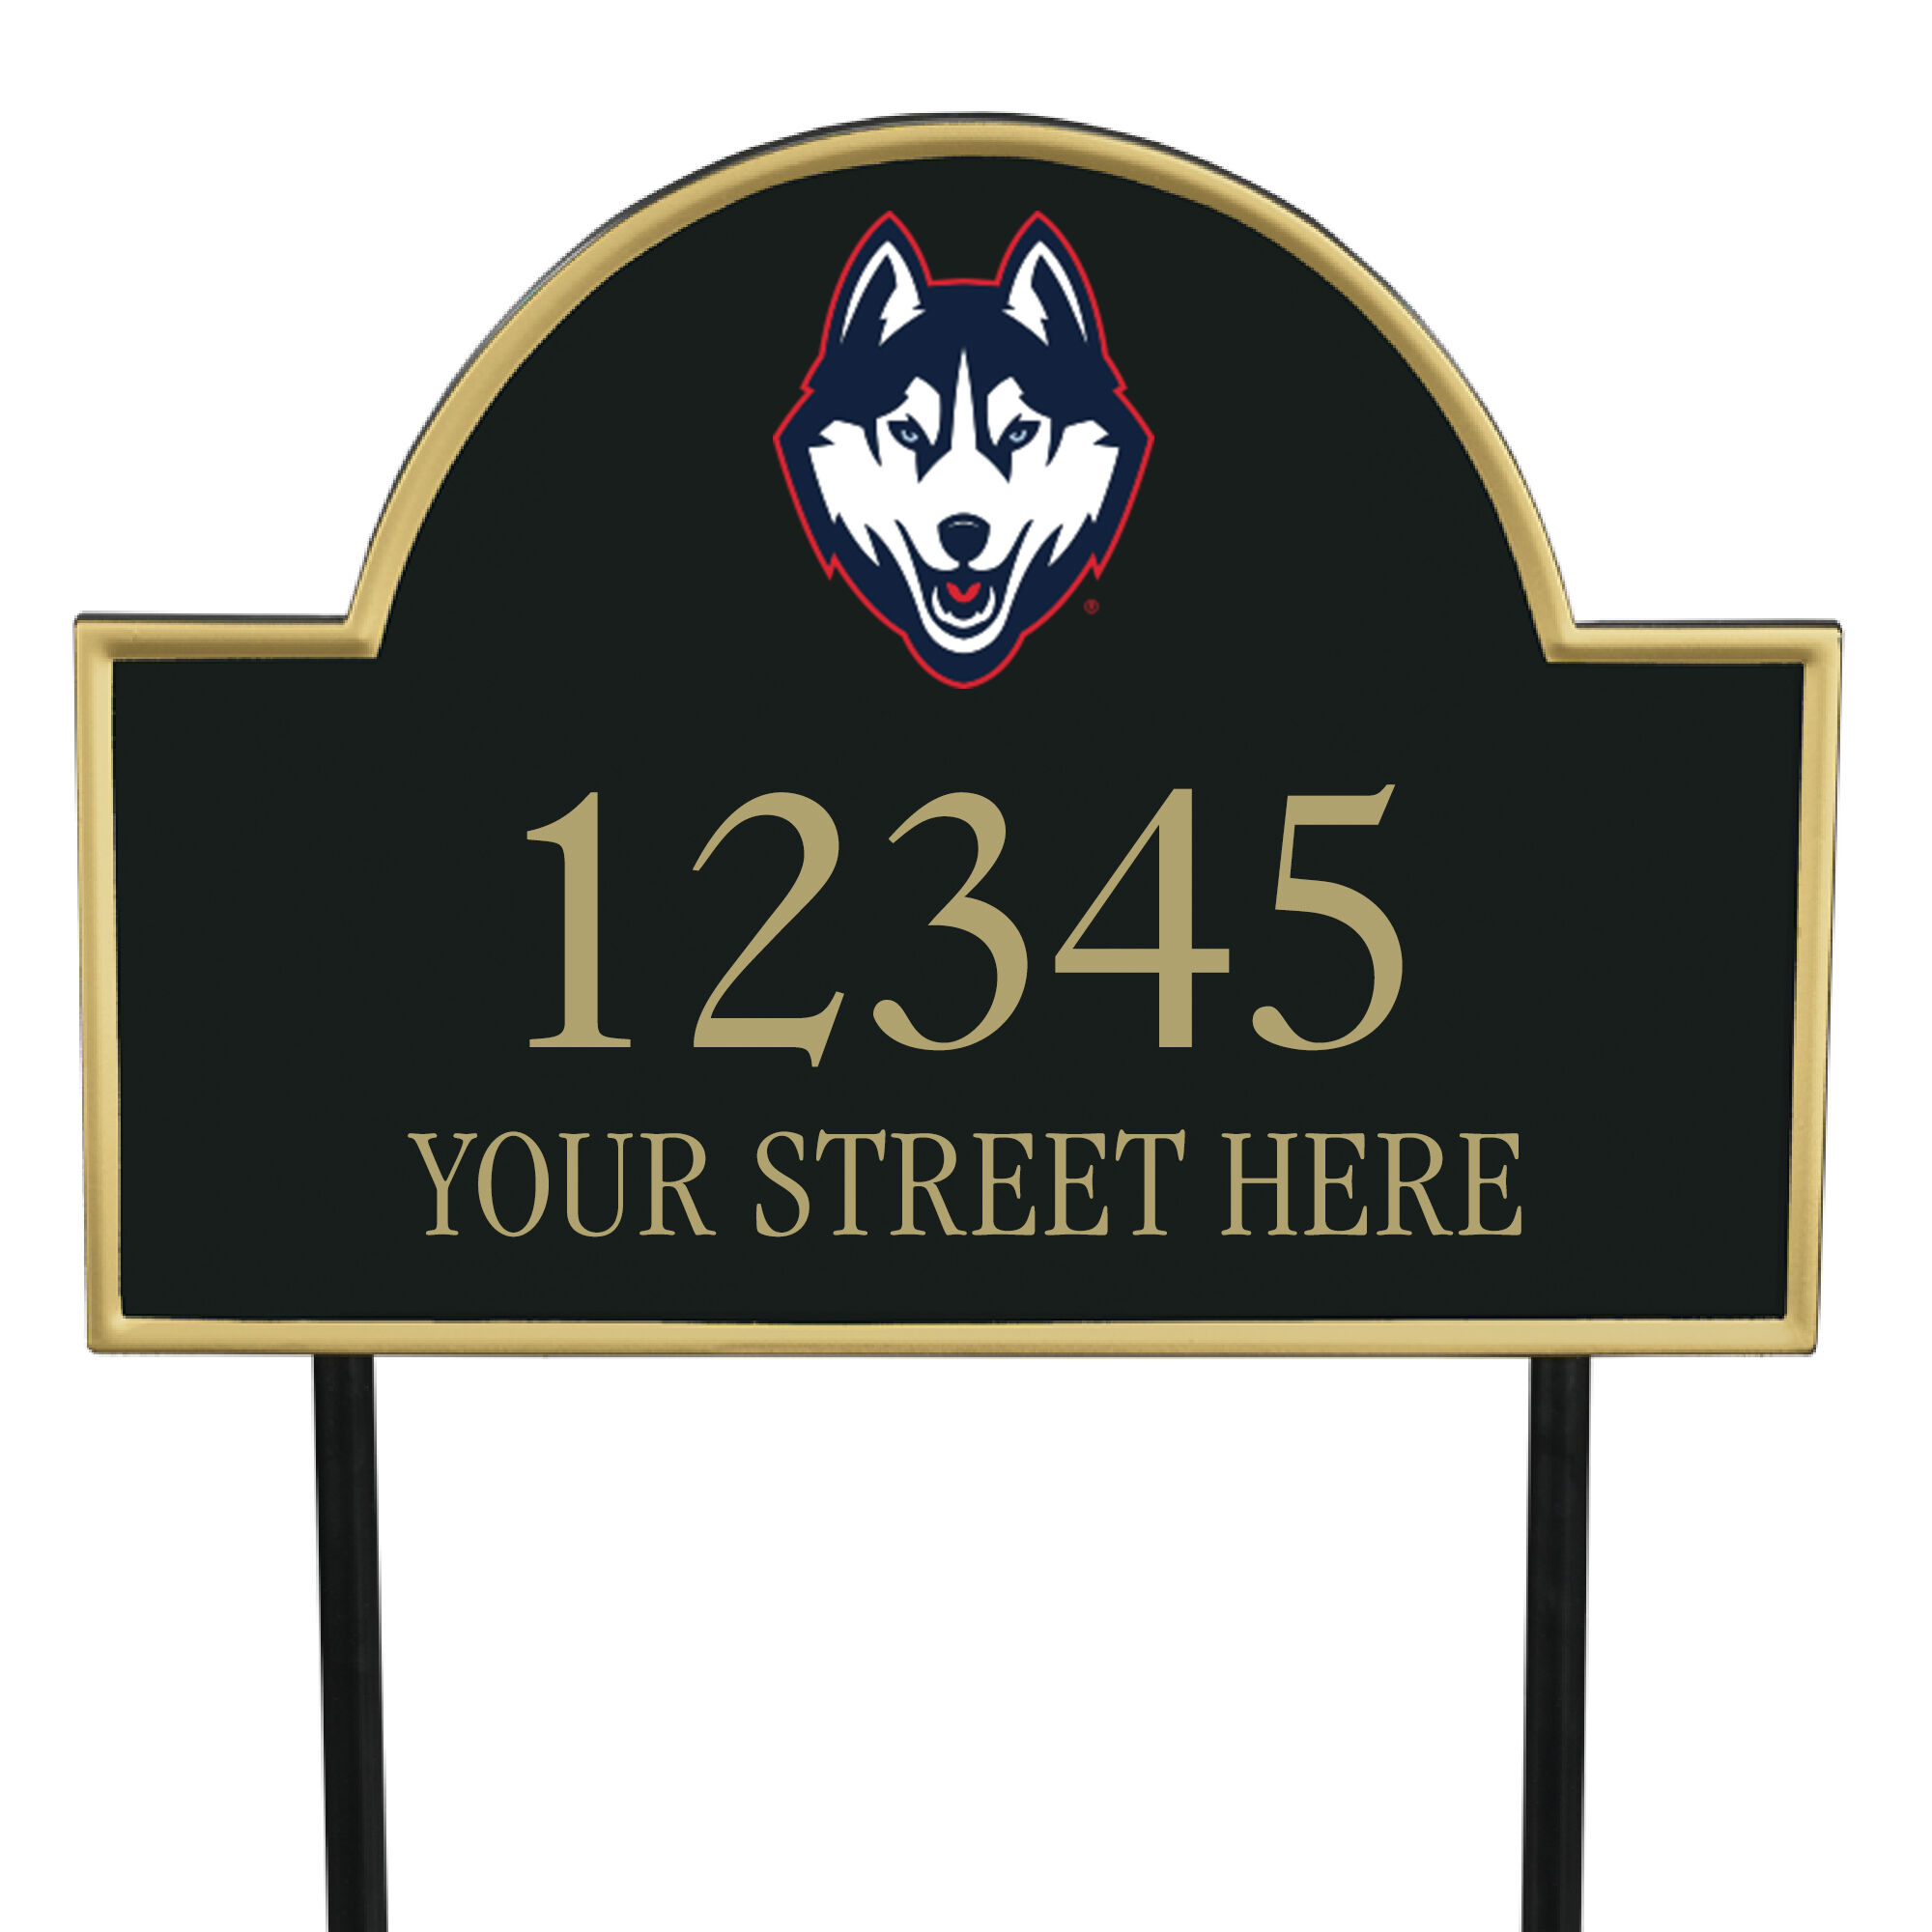 The College Personalized Address Plaque 5716 0384 b UConn